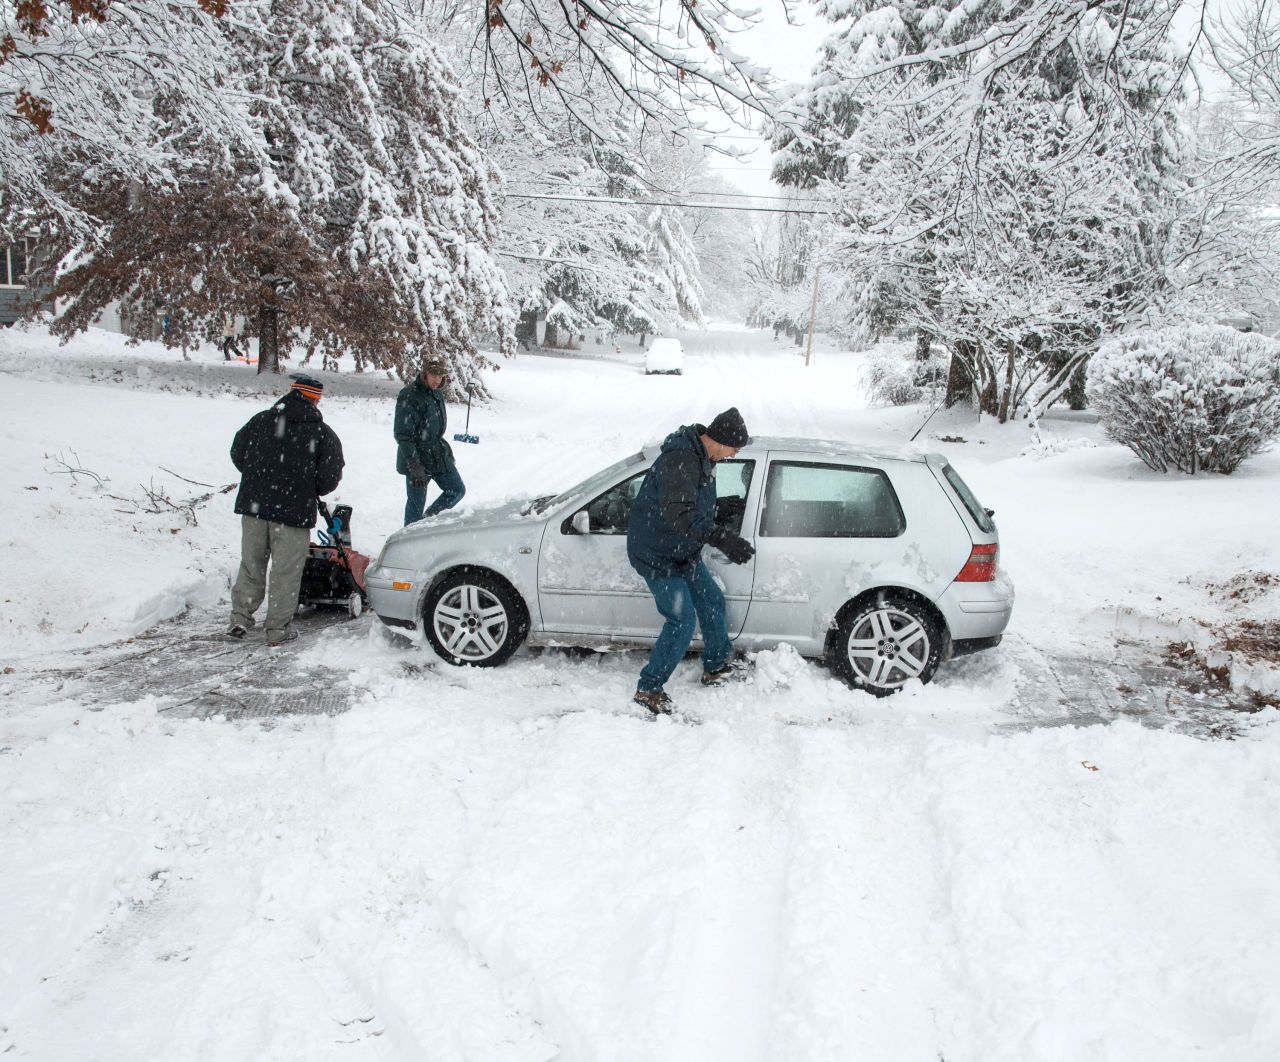 Dave Andsager, right, kicks snow out from under his car on in Champaign, Illinois, as neighbors Andy Dixon, left, and Dave Mattson help him dig out on  December 14. 